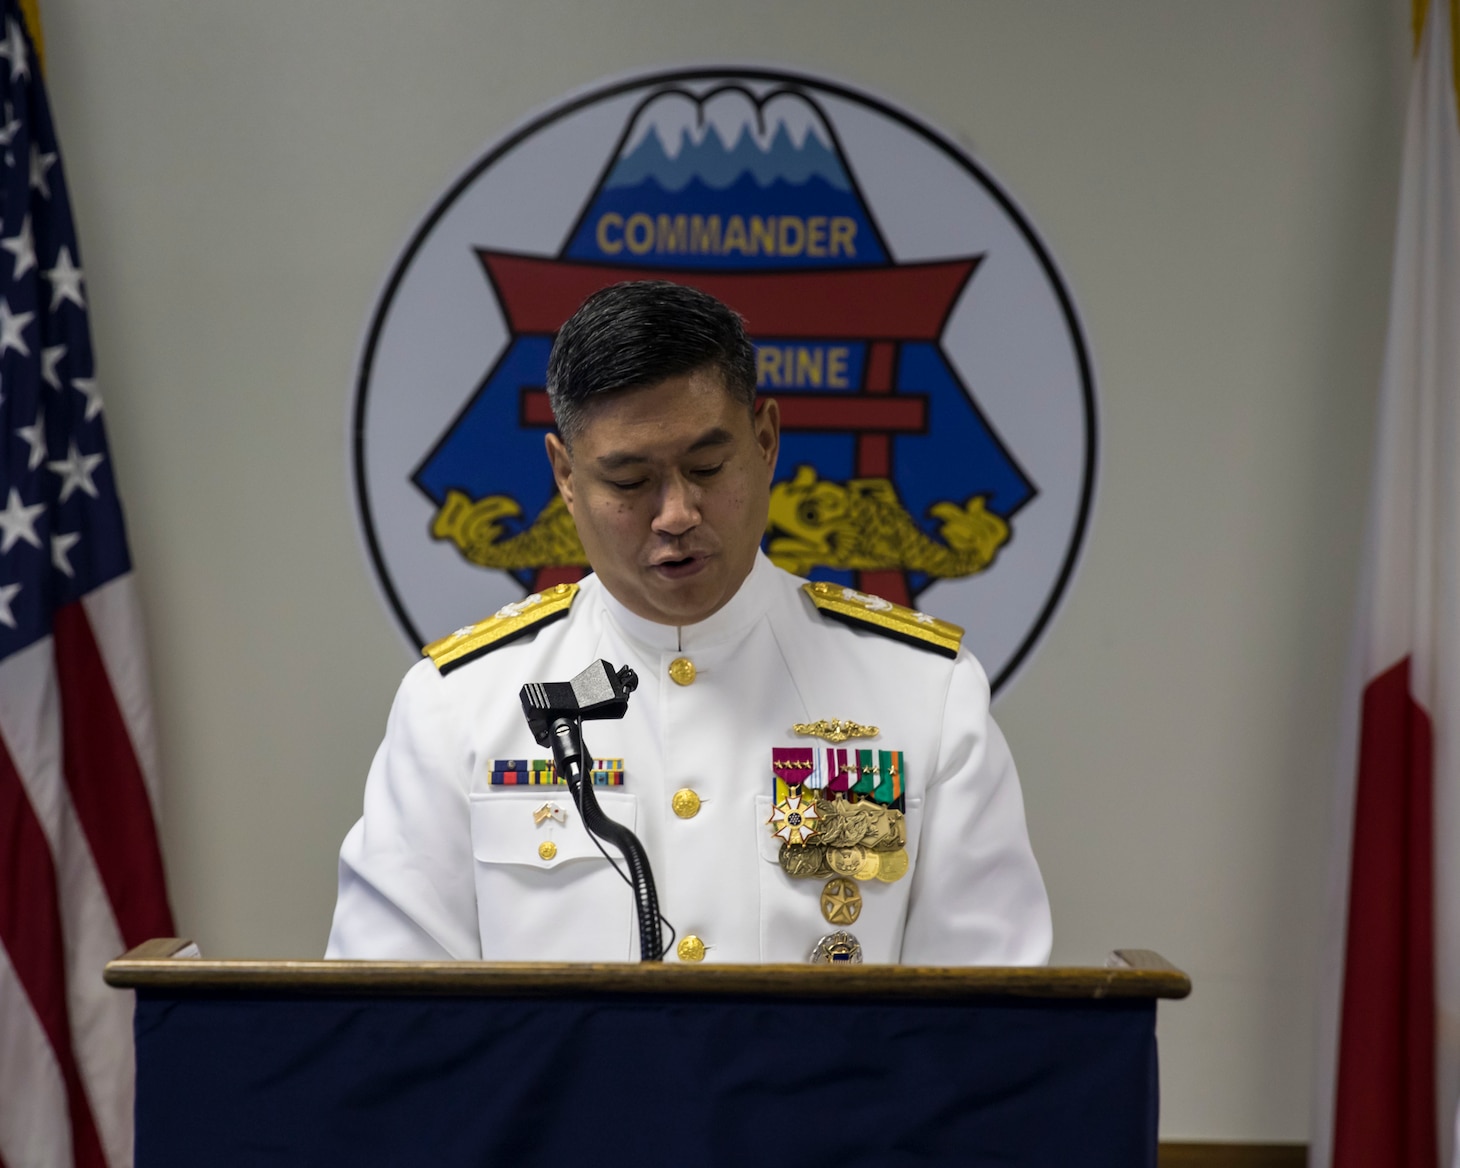 YOKOSUKA, Japan (Aug. 28, 2020)  Rear Adm. Leonard “Butch” Dollaga, Commander, Submarine Group 7 (CSG7), and a native of Vallejo, California, gives remarks during a change of command ceremony. Dollaga relieved Rear Adm. James “Jimmy” Pitts, a native of Milton, Florida, of command at Fluckey Hall. CSG7 directs submarine activities throughout the Western Pacific, Indian Ocean and Arabian Sea; two forward-deployed submarine tenders and four attack submarines homeported in Guam; five surveillance towed array sensor system vessels and three oceanographic survey vessels when tasked for theater anti-submarine warfare operations.